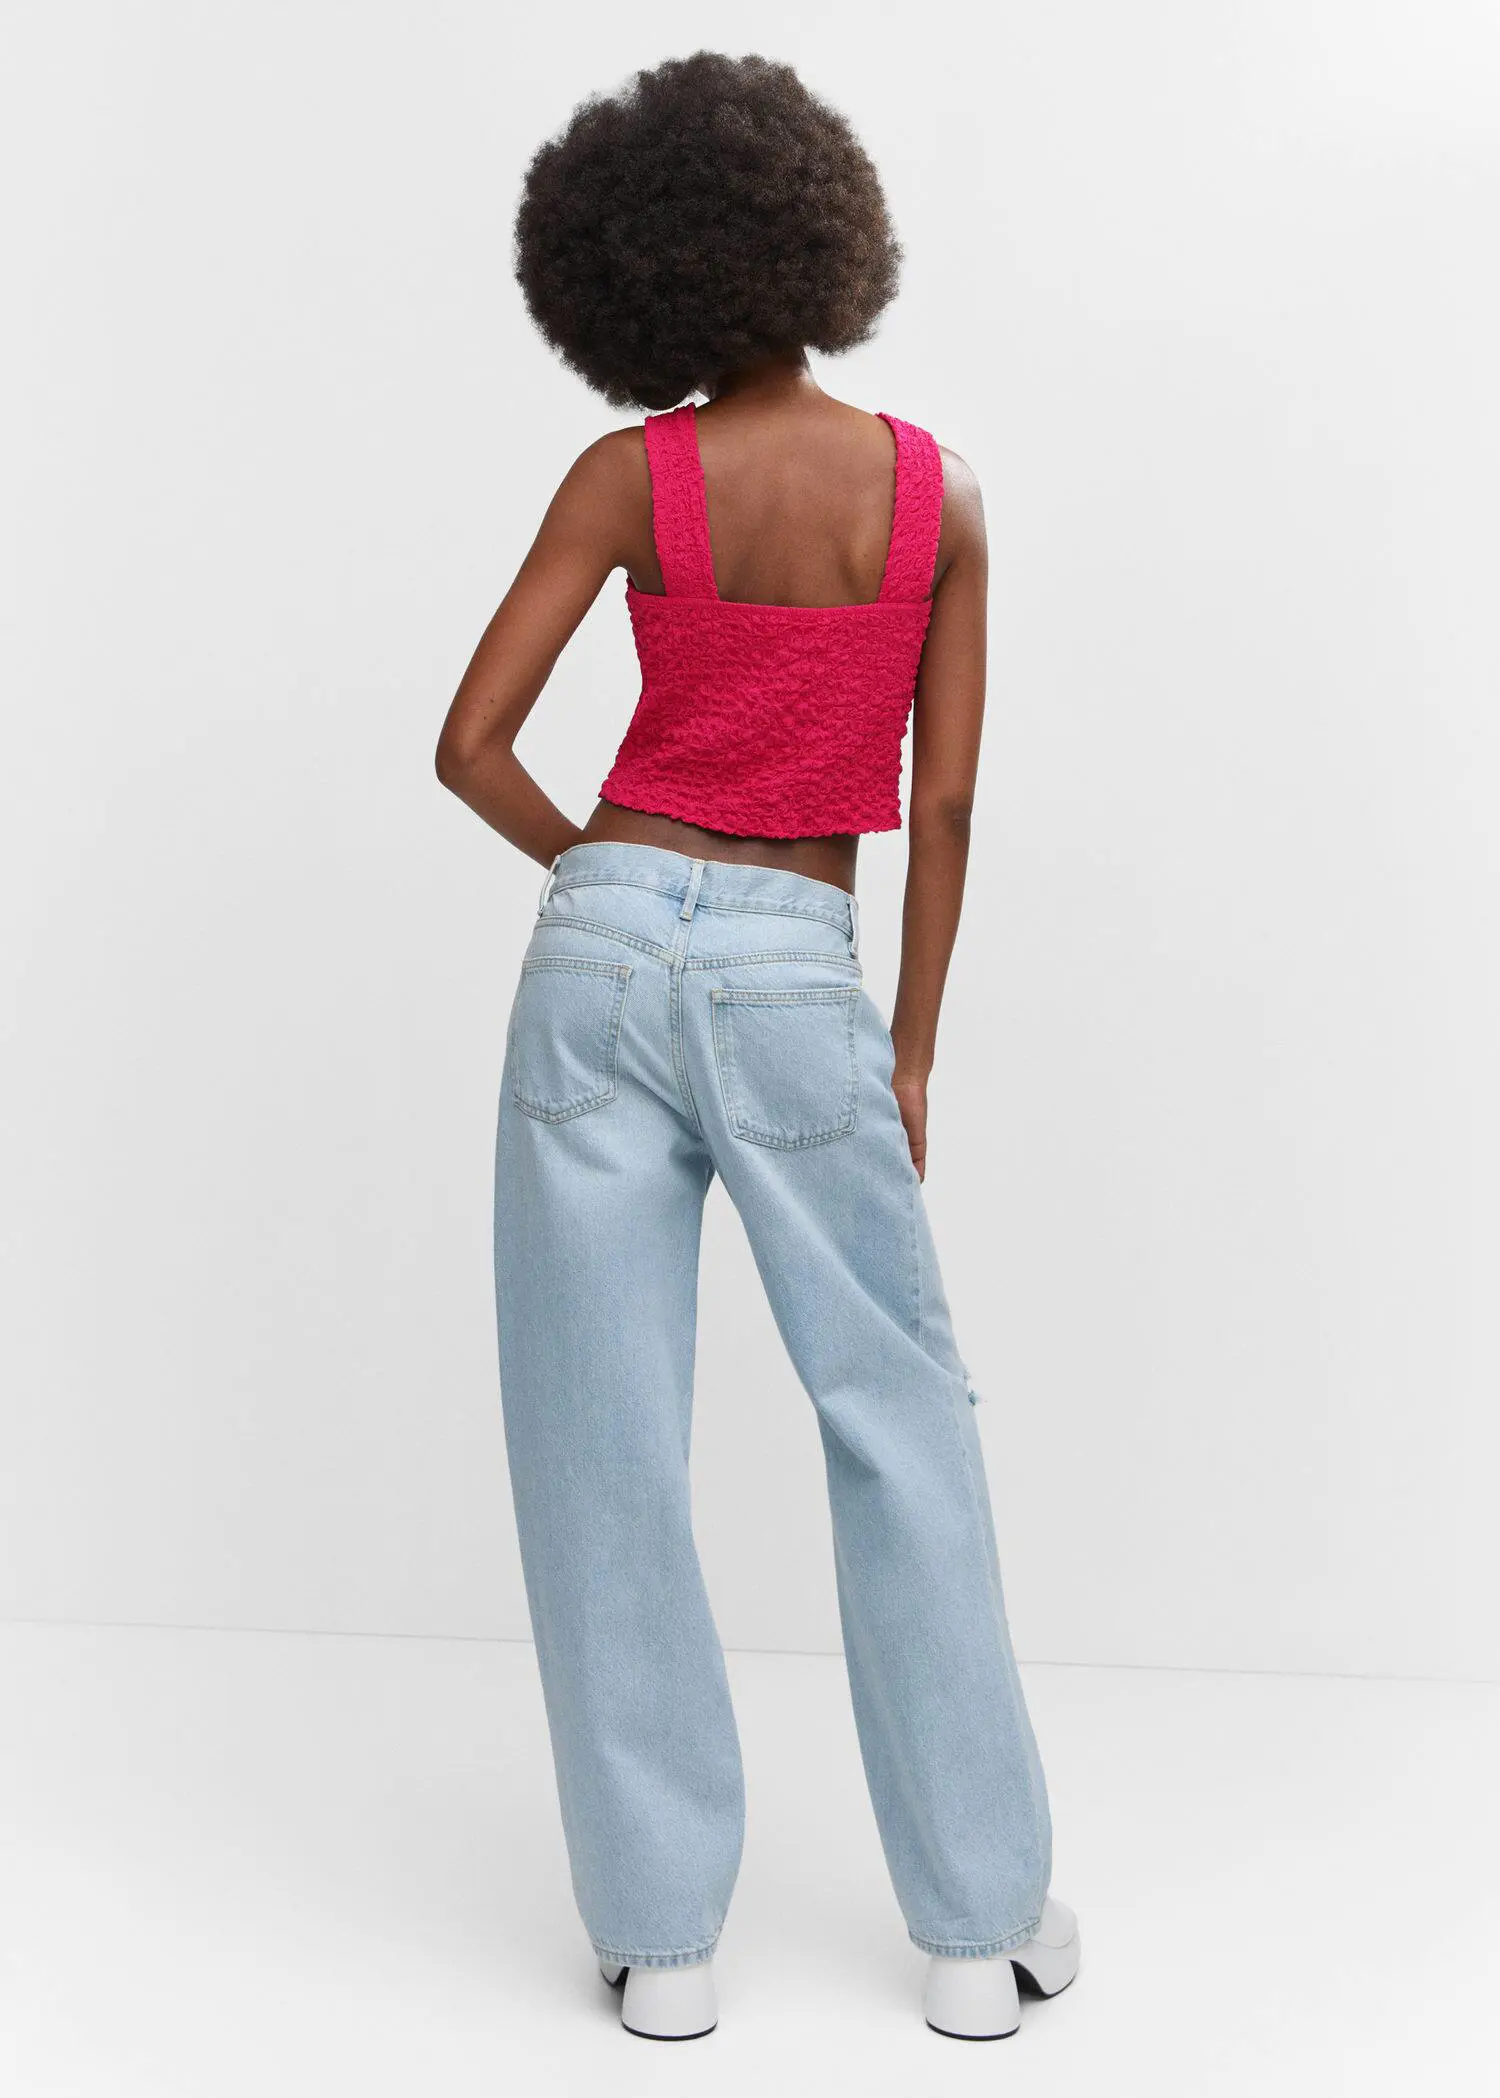 Mango Textured top with ring detail. a woman in a red top and light blue jeans. 